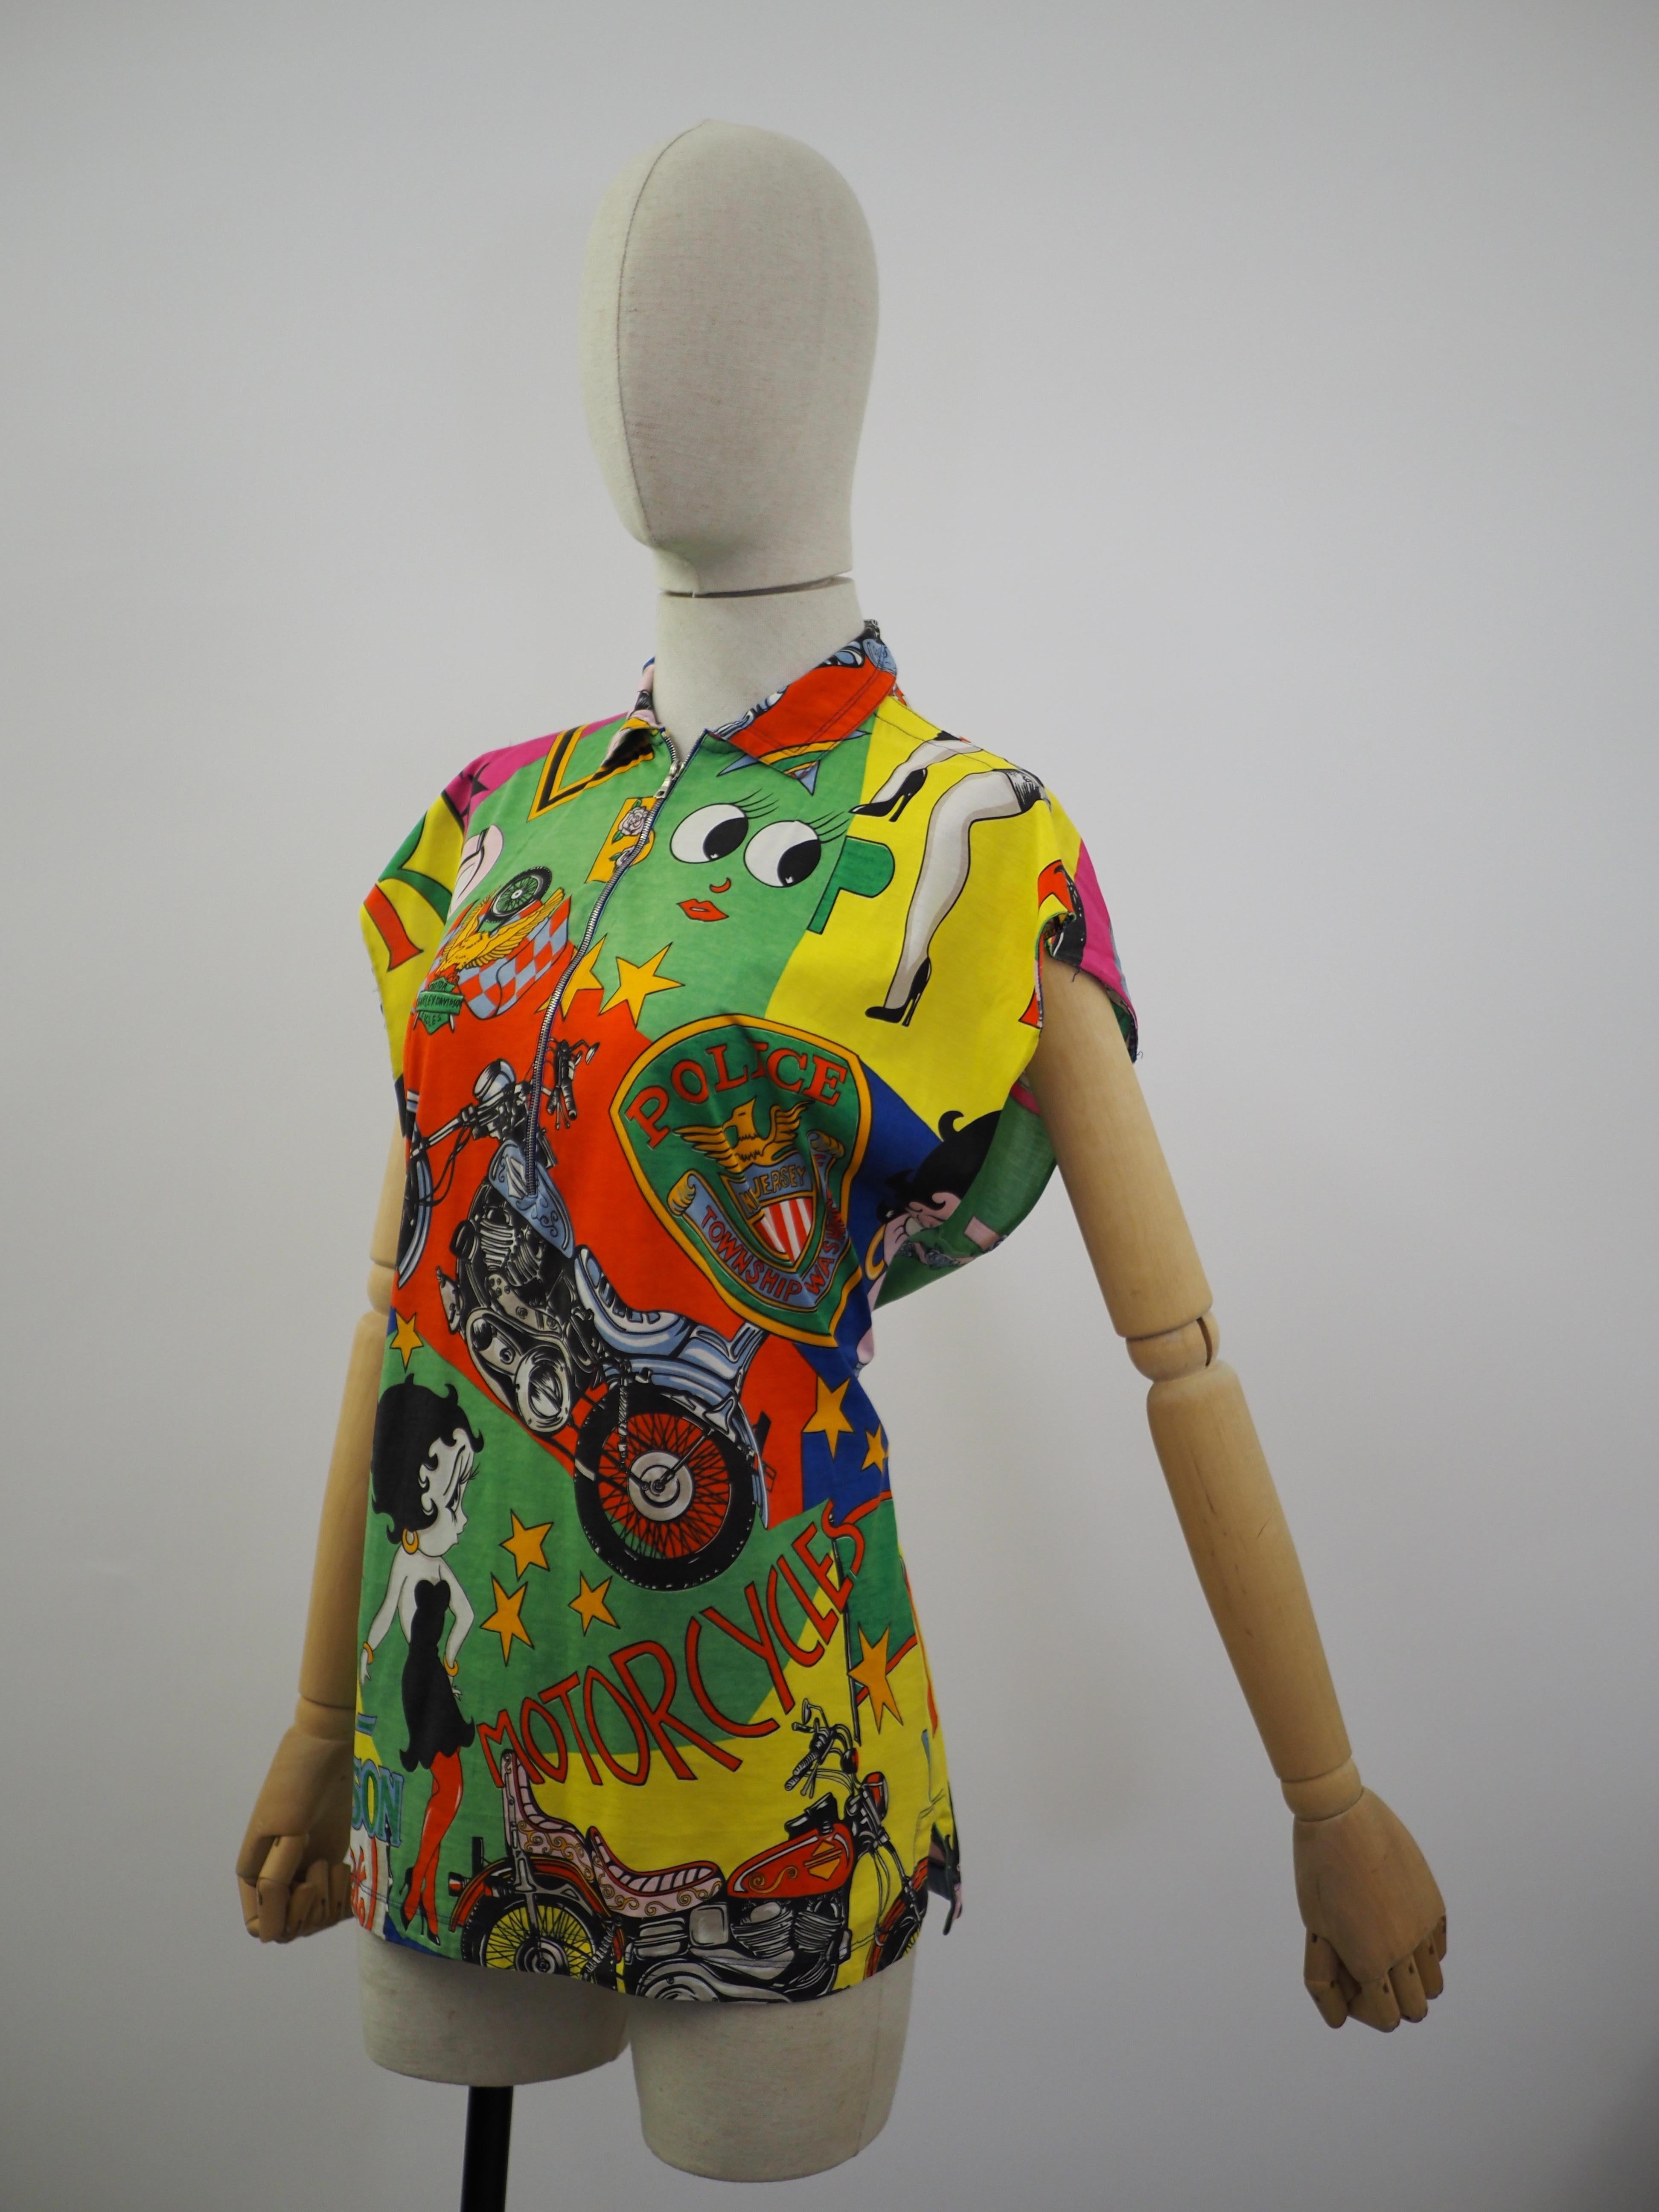 Gianni Versace pop art Betty Boop shirt In Good Condition For Sale In Capri, IT